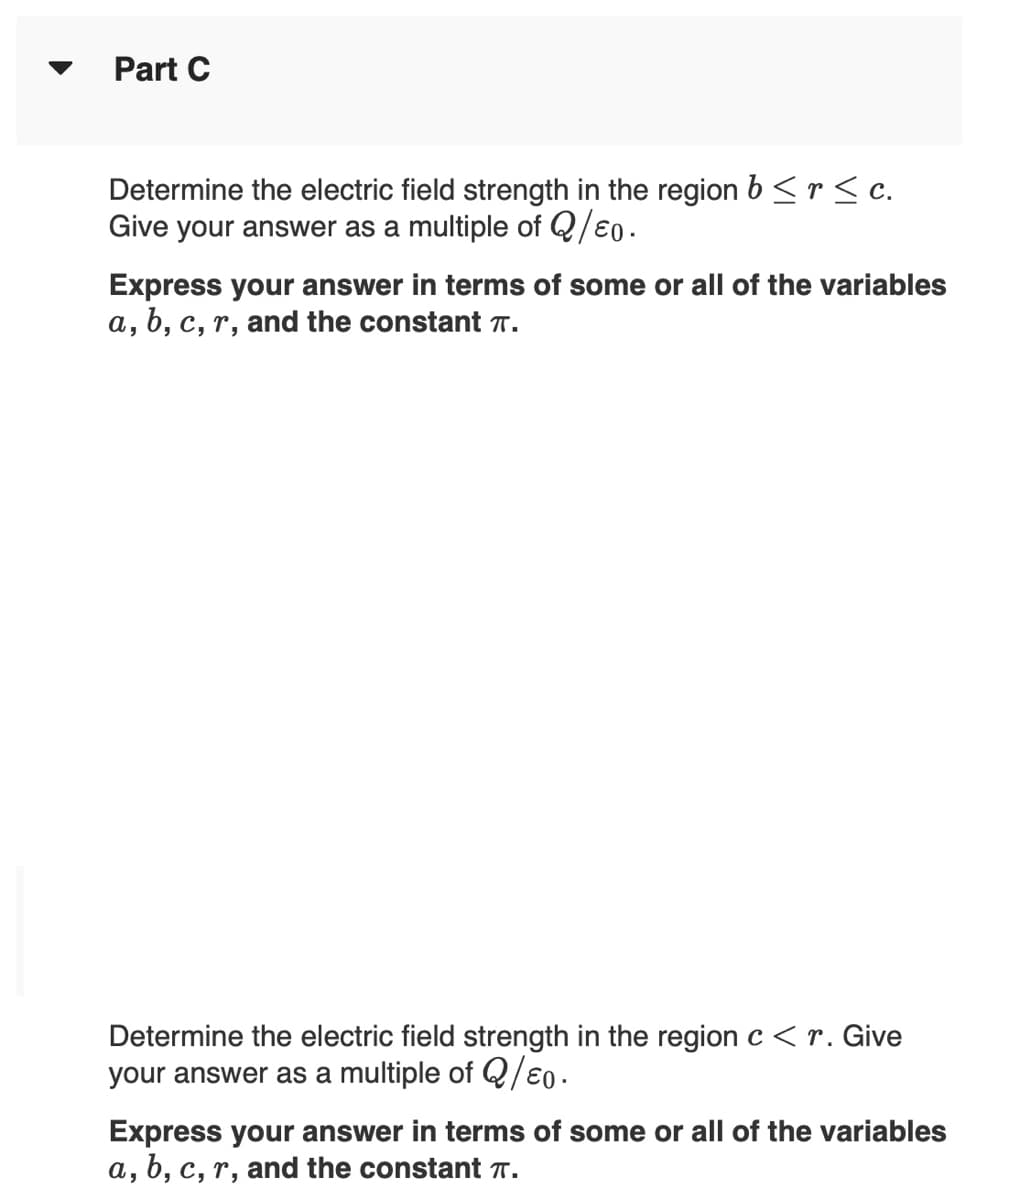 Part C
Determine the electric field strength in the region b <r< c.
Give your answer as a multiple of Q/e0.
Express your answer in terms of some or all of the variables
a, b, c, r, and the constant T.
Determine the electric field strength in the regionc<r. Give
your answer as a multiple of Q/€0.
Express your answer in terms of some or all of the variables
a, b, c, r, and the constant T.
